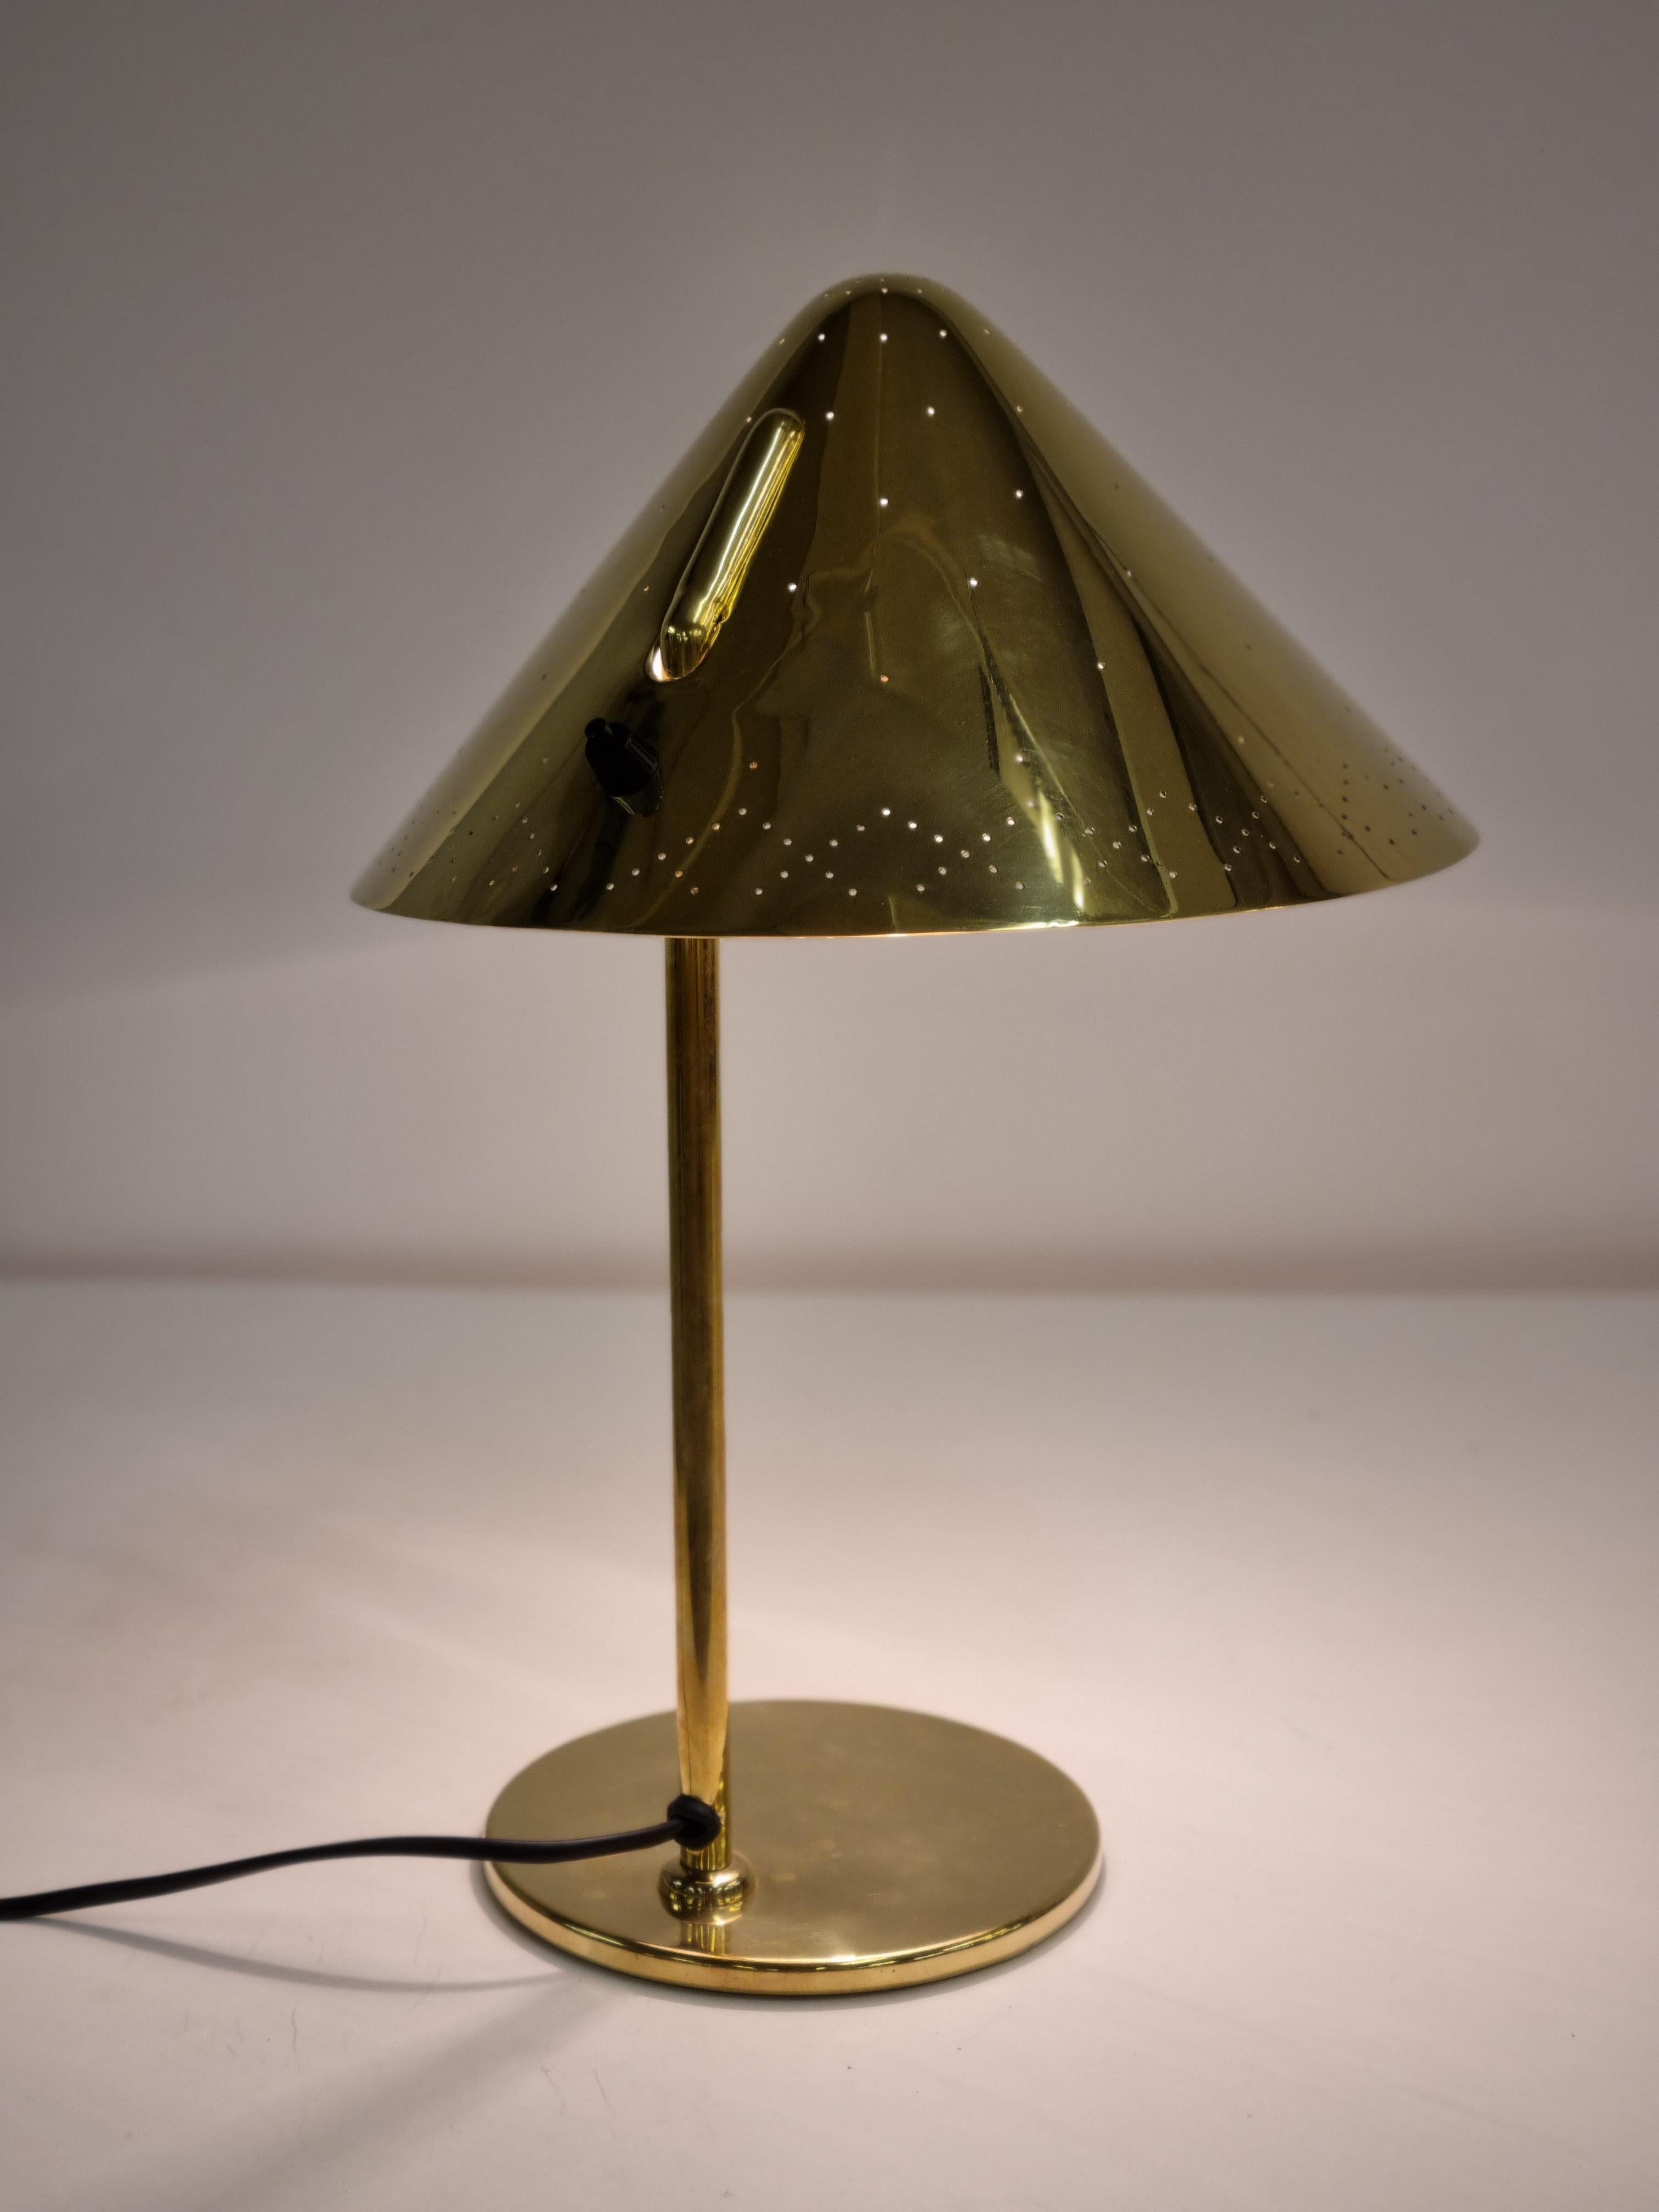 Scandinavian Modern Commissioned Paavo Tynell Table Lamp, Taito Oy, 1950s For Sale